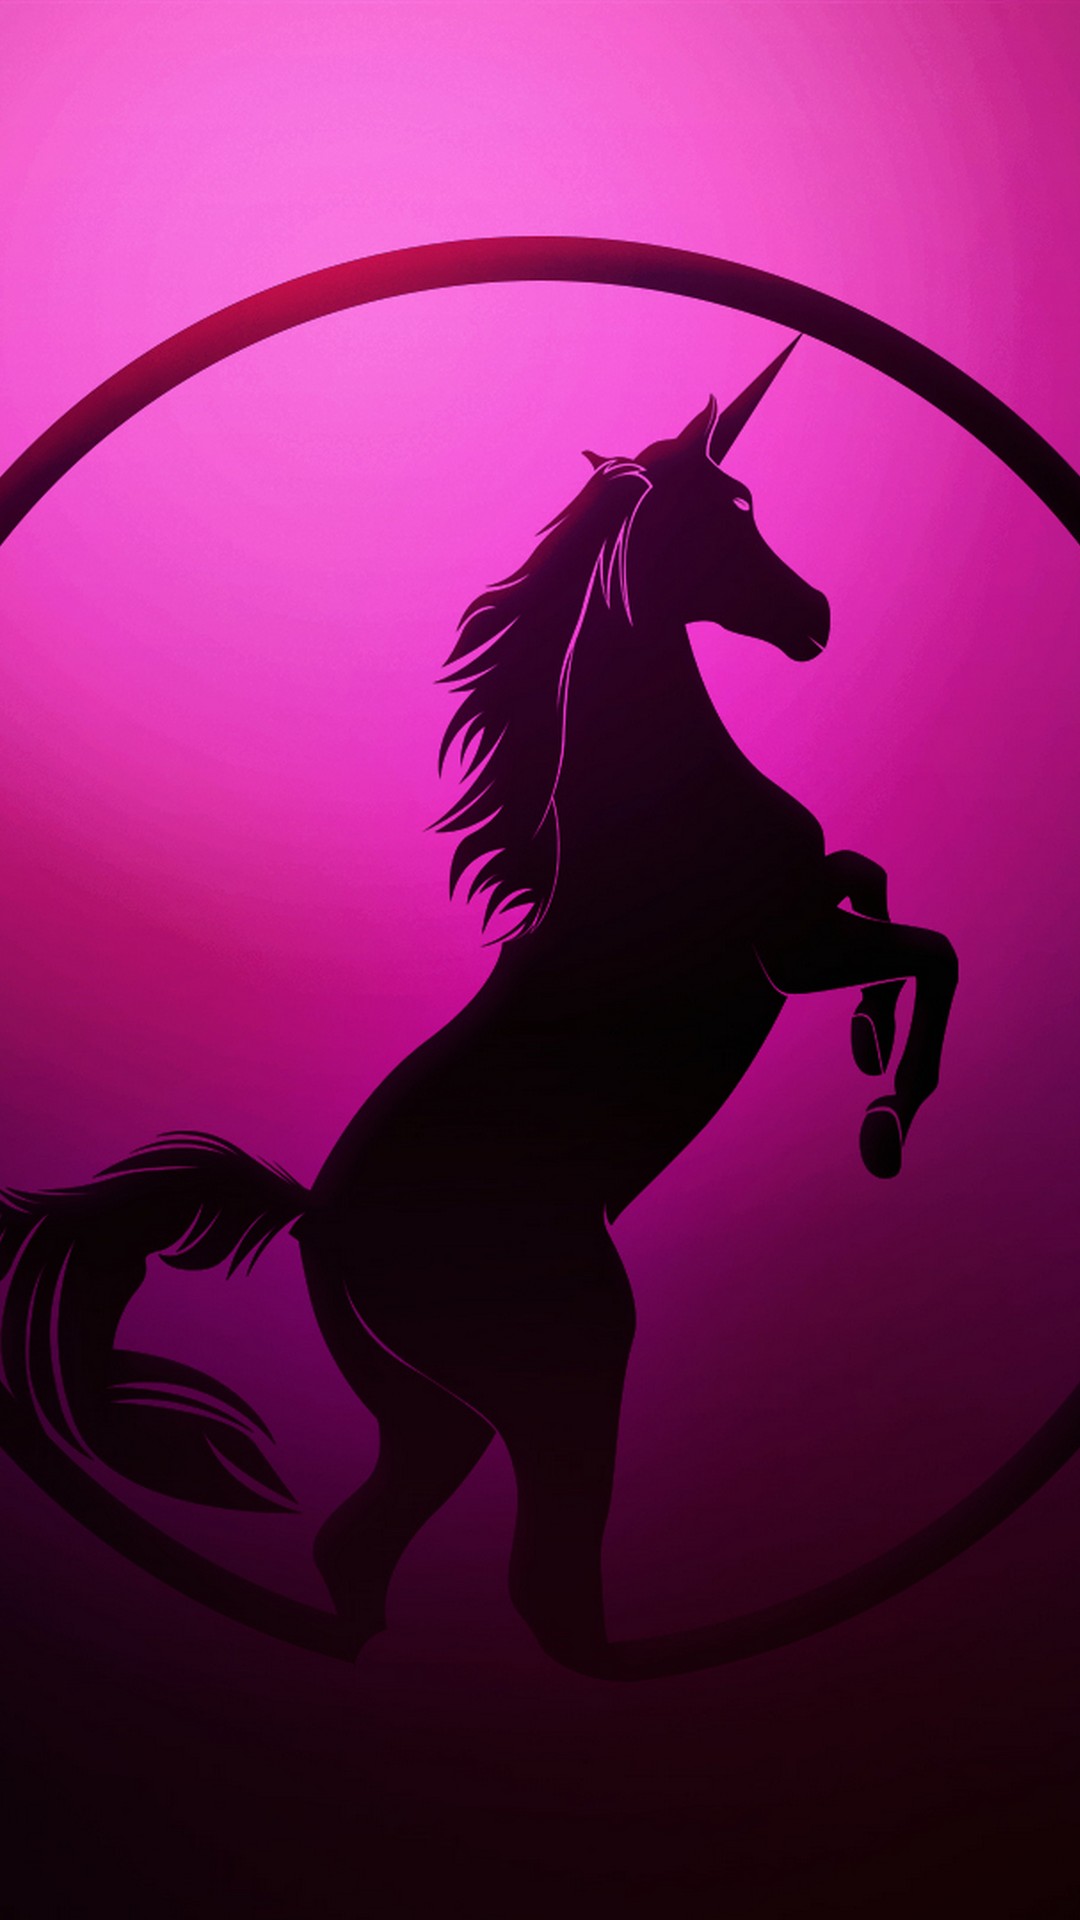 Unicorn iPhone X Wallpaper HD with high-resolution 1080x1920 pixel. Download all Mobile Wallpapers and Use them as wallpapers for your iPhone, Tablet, iPad, Android and other mobile devices